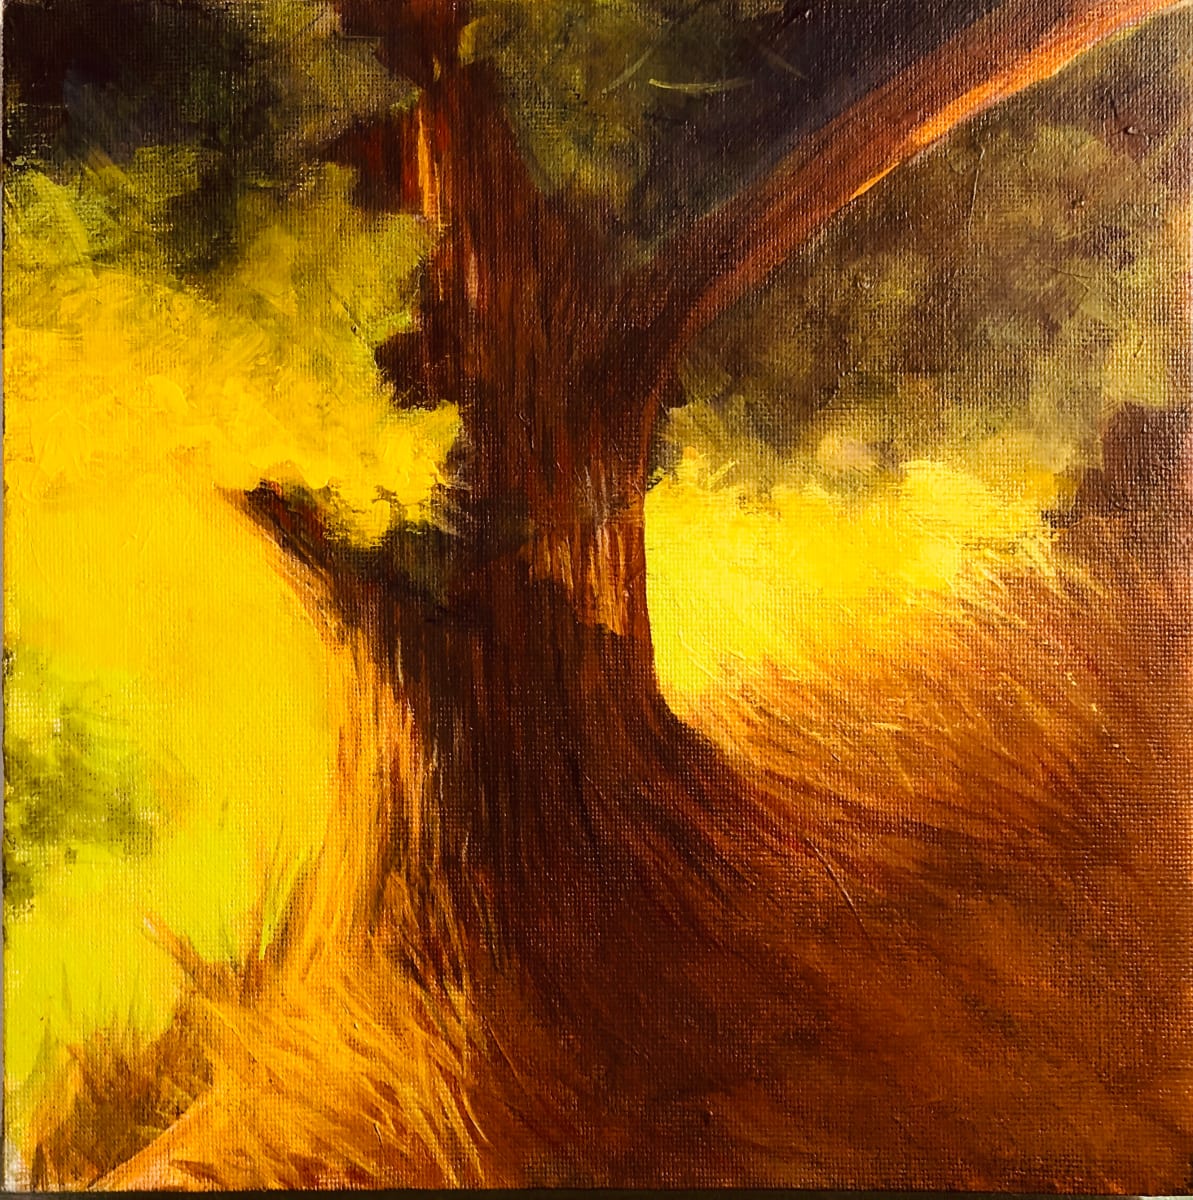 Mary's Tree by Karen Phillips~Curran  Image: "Mary's Tree" 